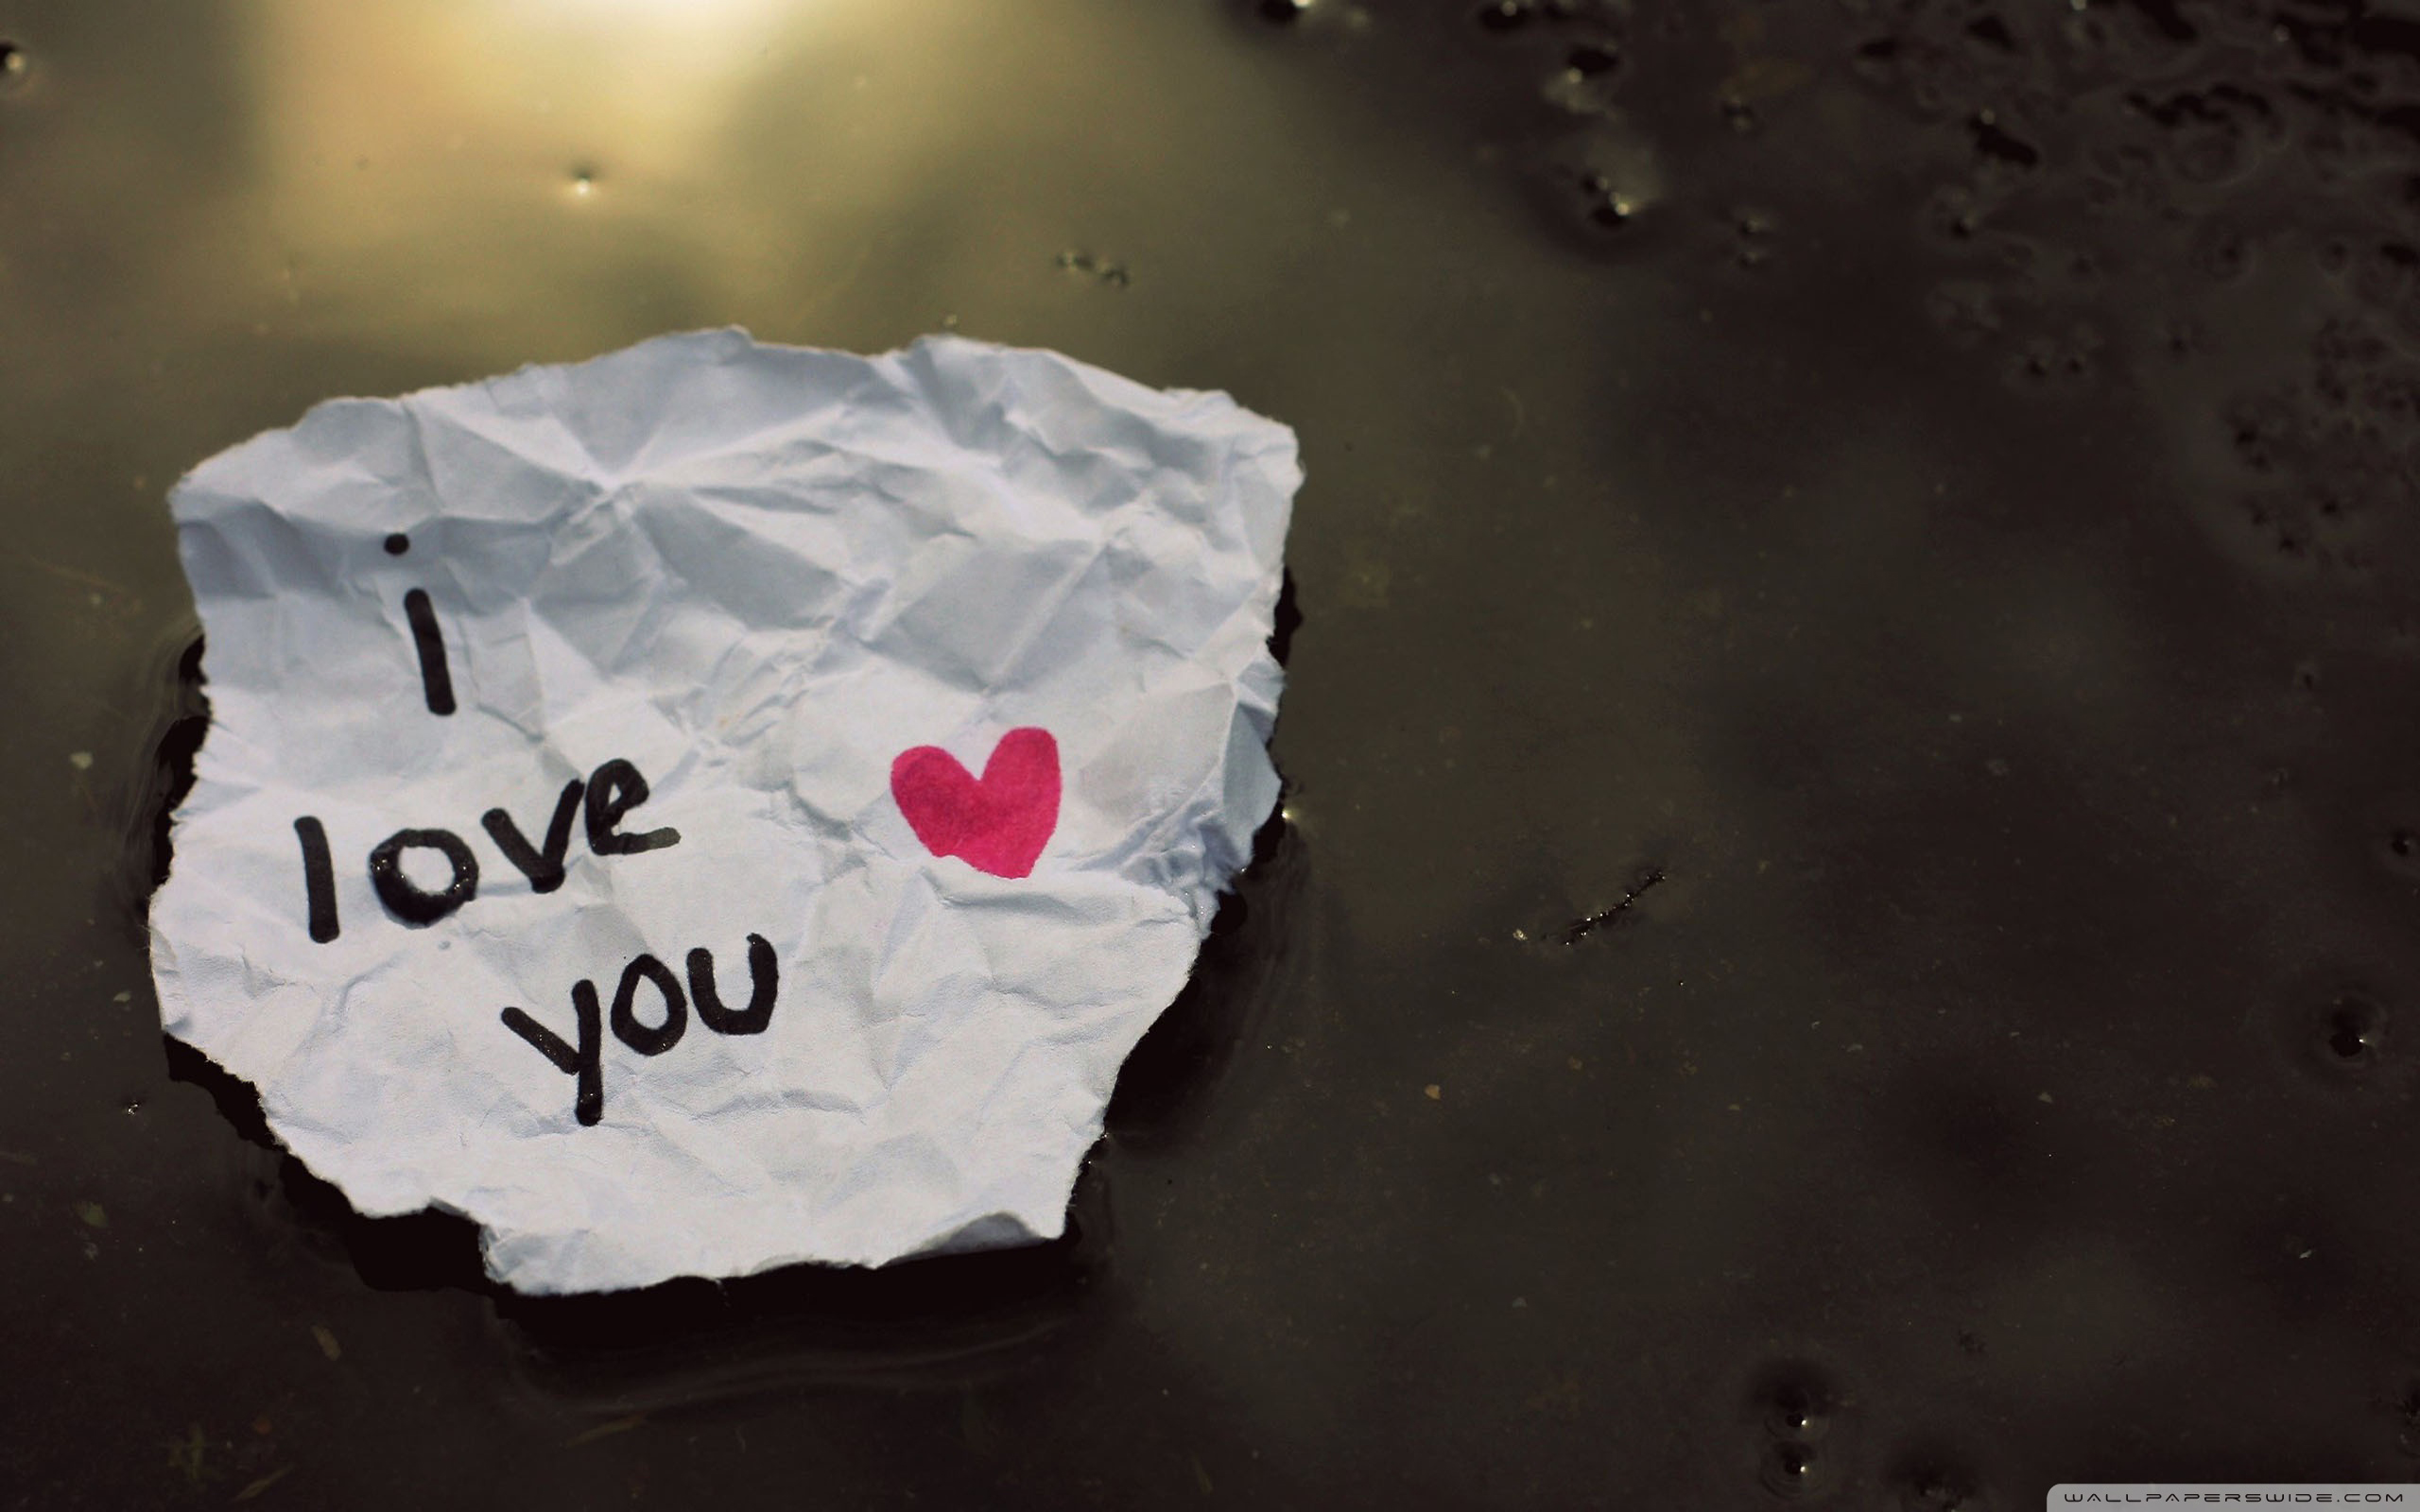 I Love You Message Wallpaper 2560x1600 : 